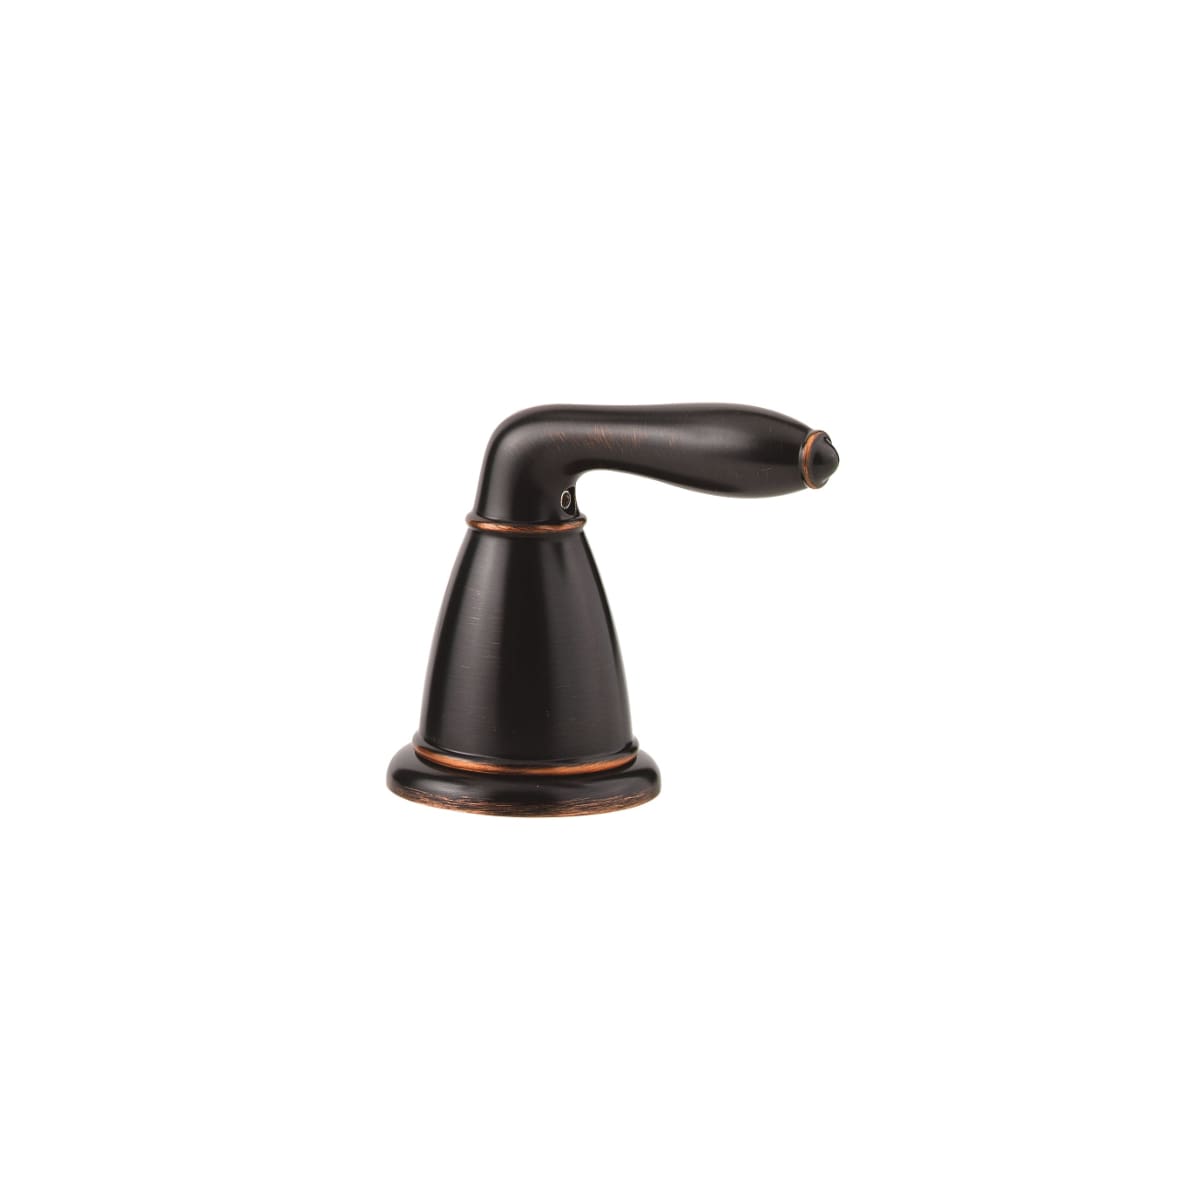 Pfister 940 146y Tuscan Bronze Replacement Lever Handle For